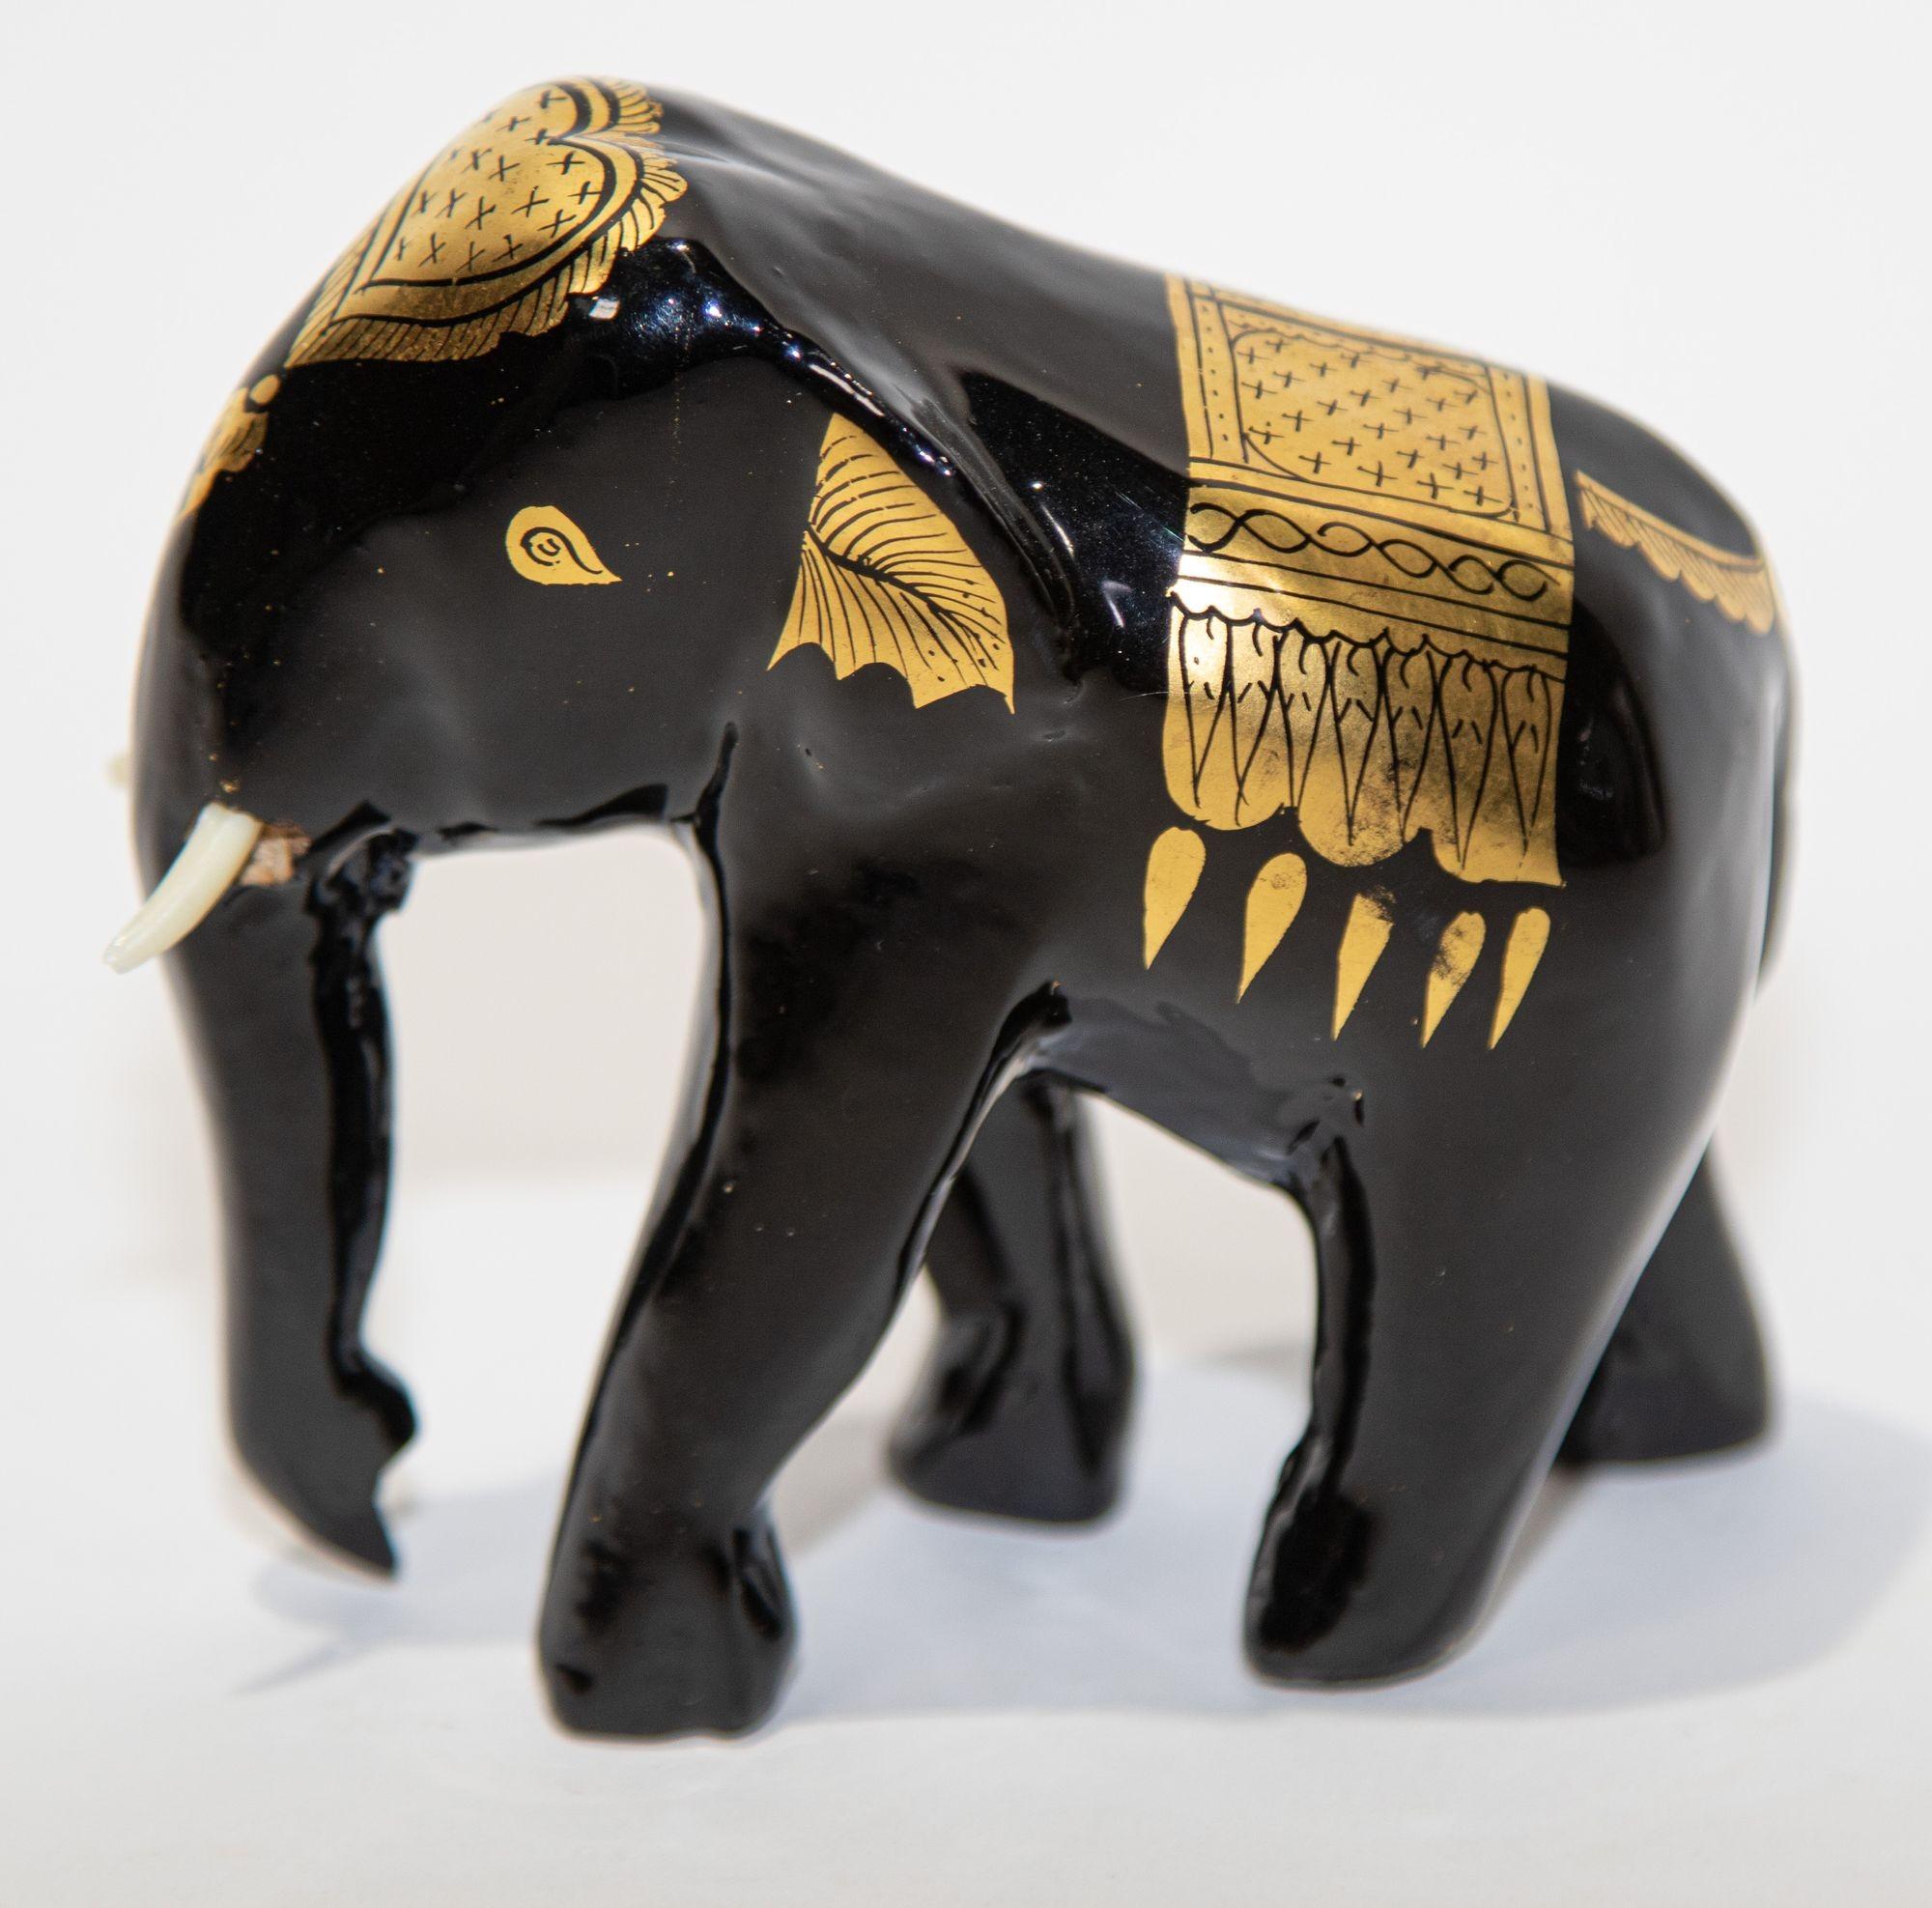 Black and Gold Lacquered Thai Elephant sculpture.
This small elephant sculpture was handcrafted and hand-painted with several coats of glossy black lacquer and than the ceremonial attire is finely hand painted with 24 karat gold foil, trunk